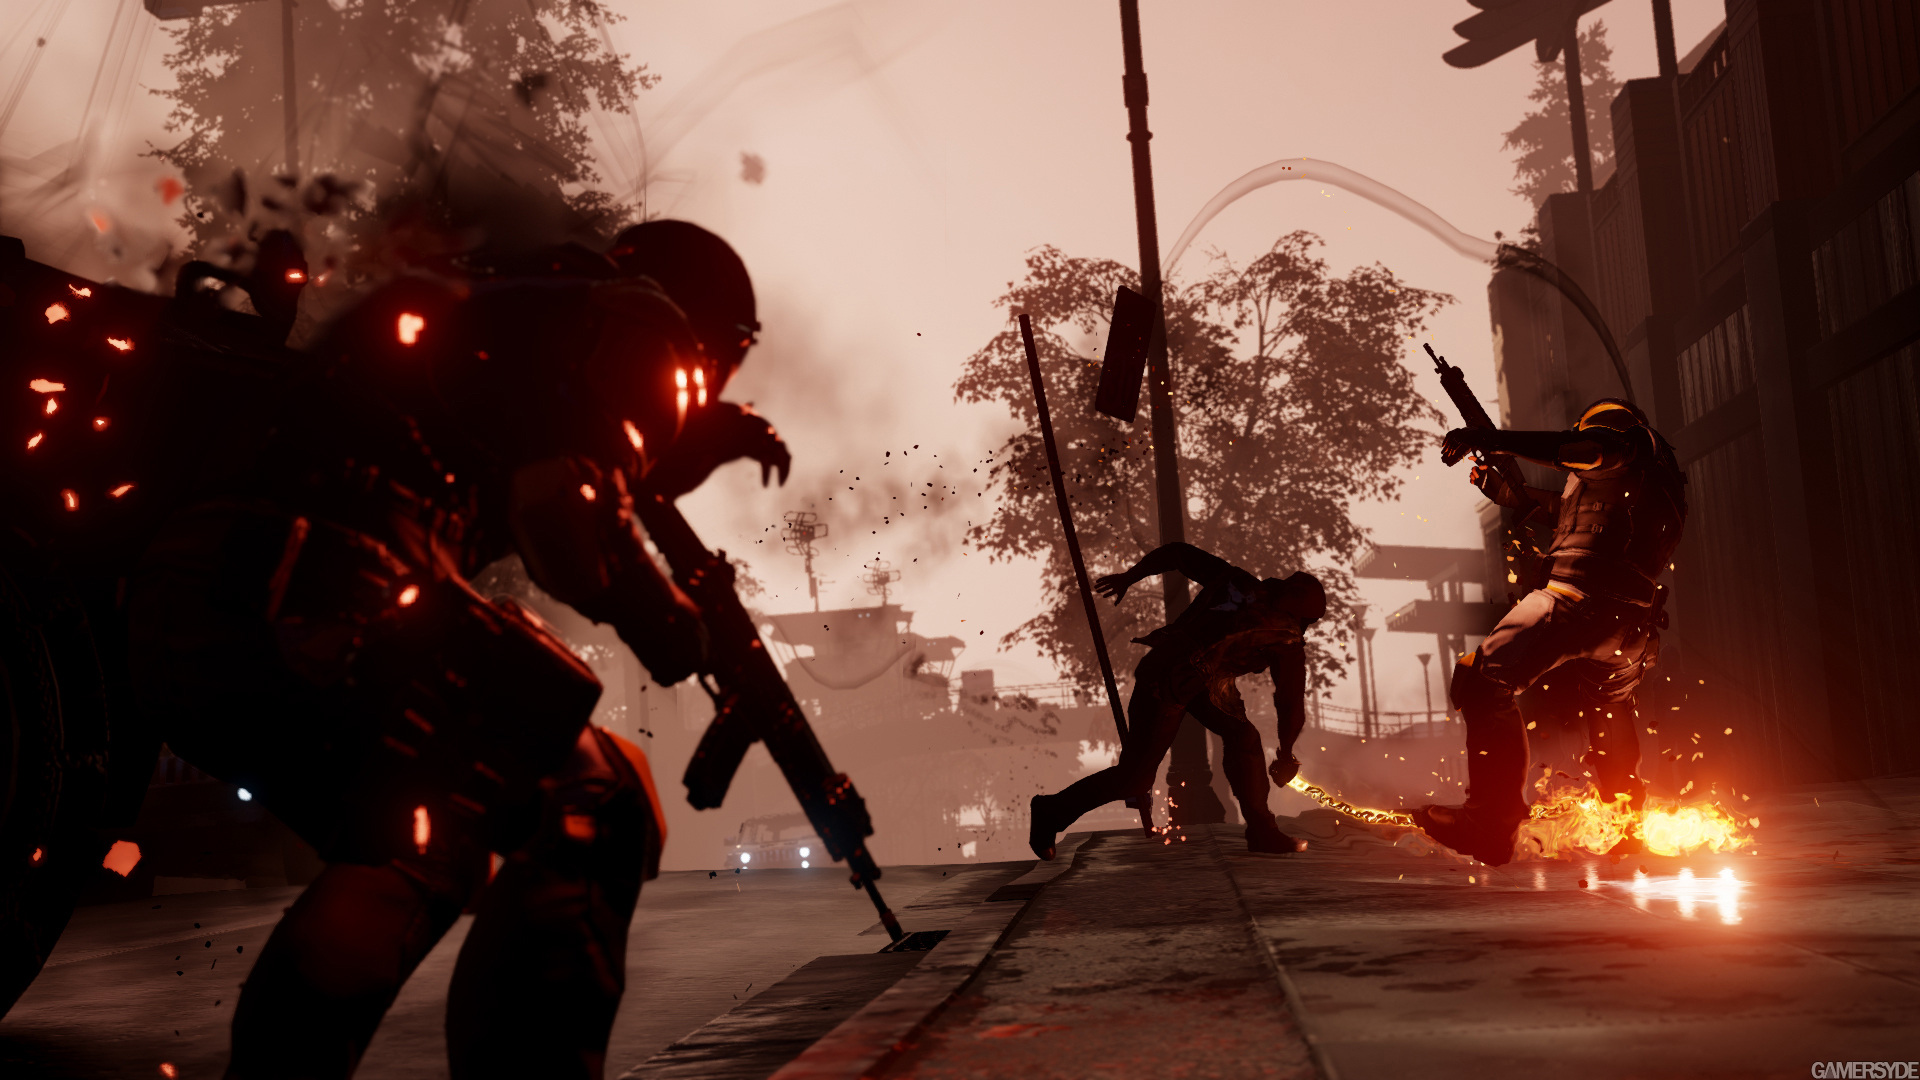 image_infamous_second_son-22142-2661_0005.jpg